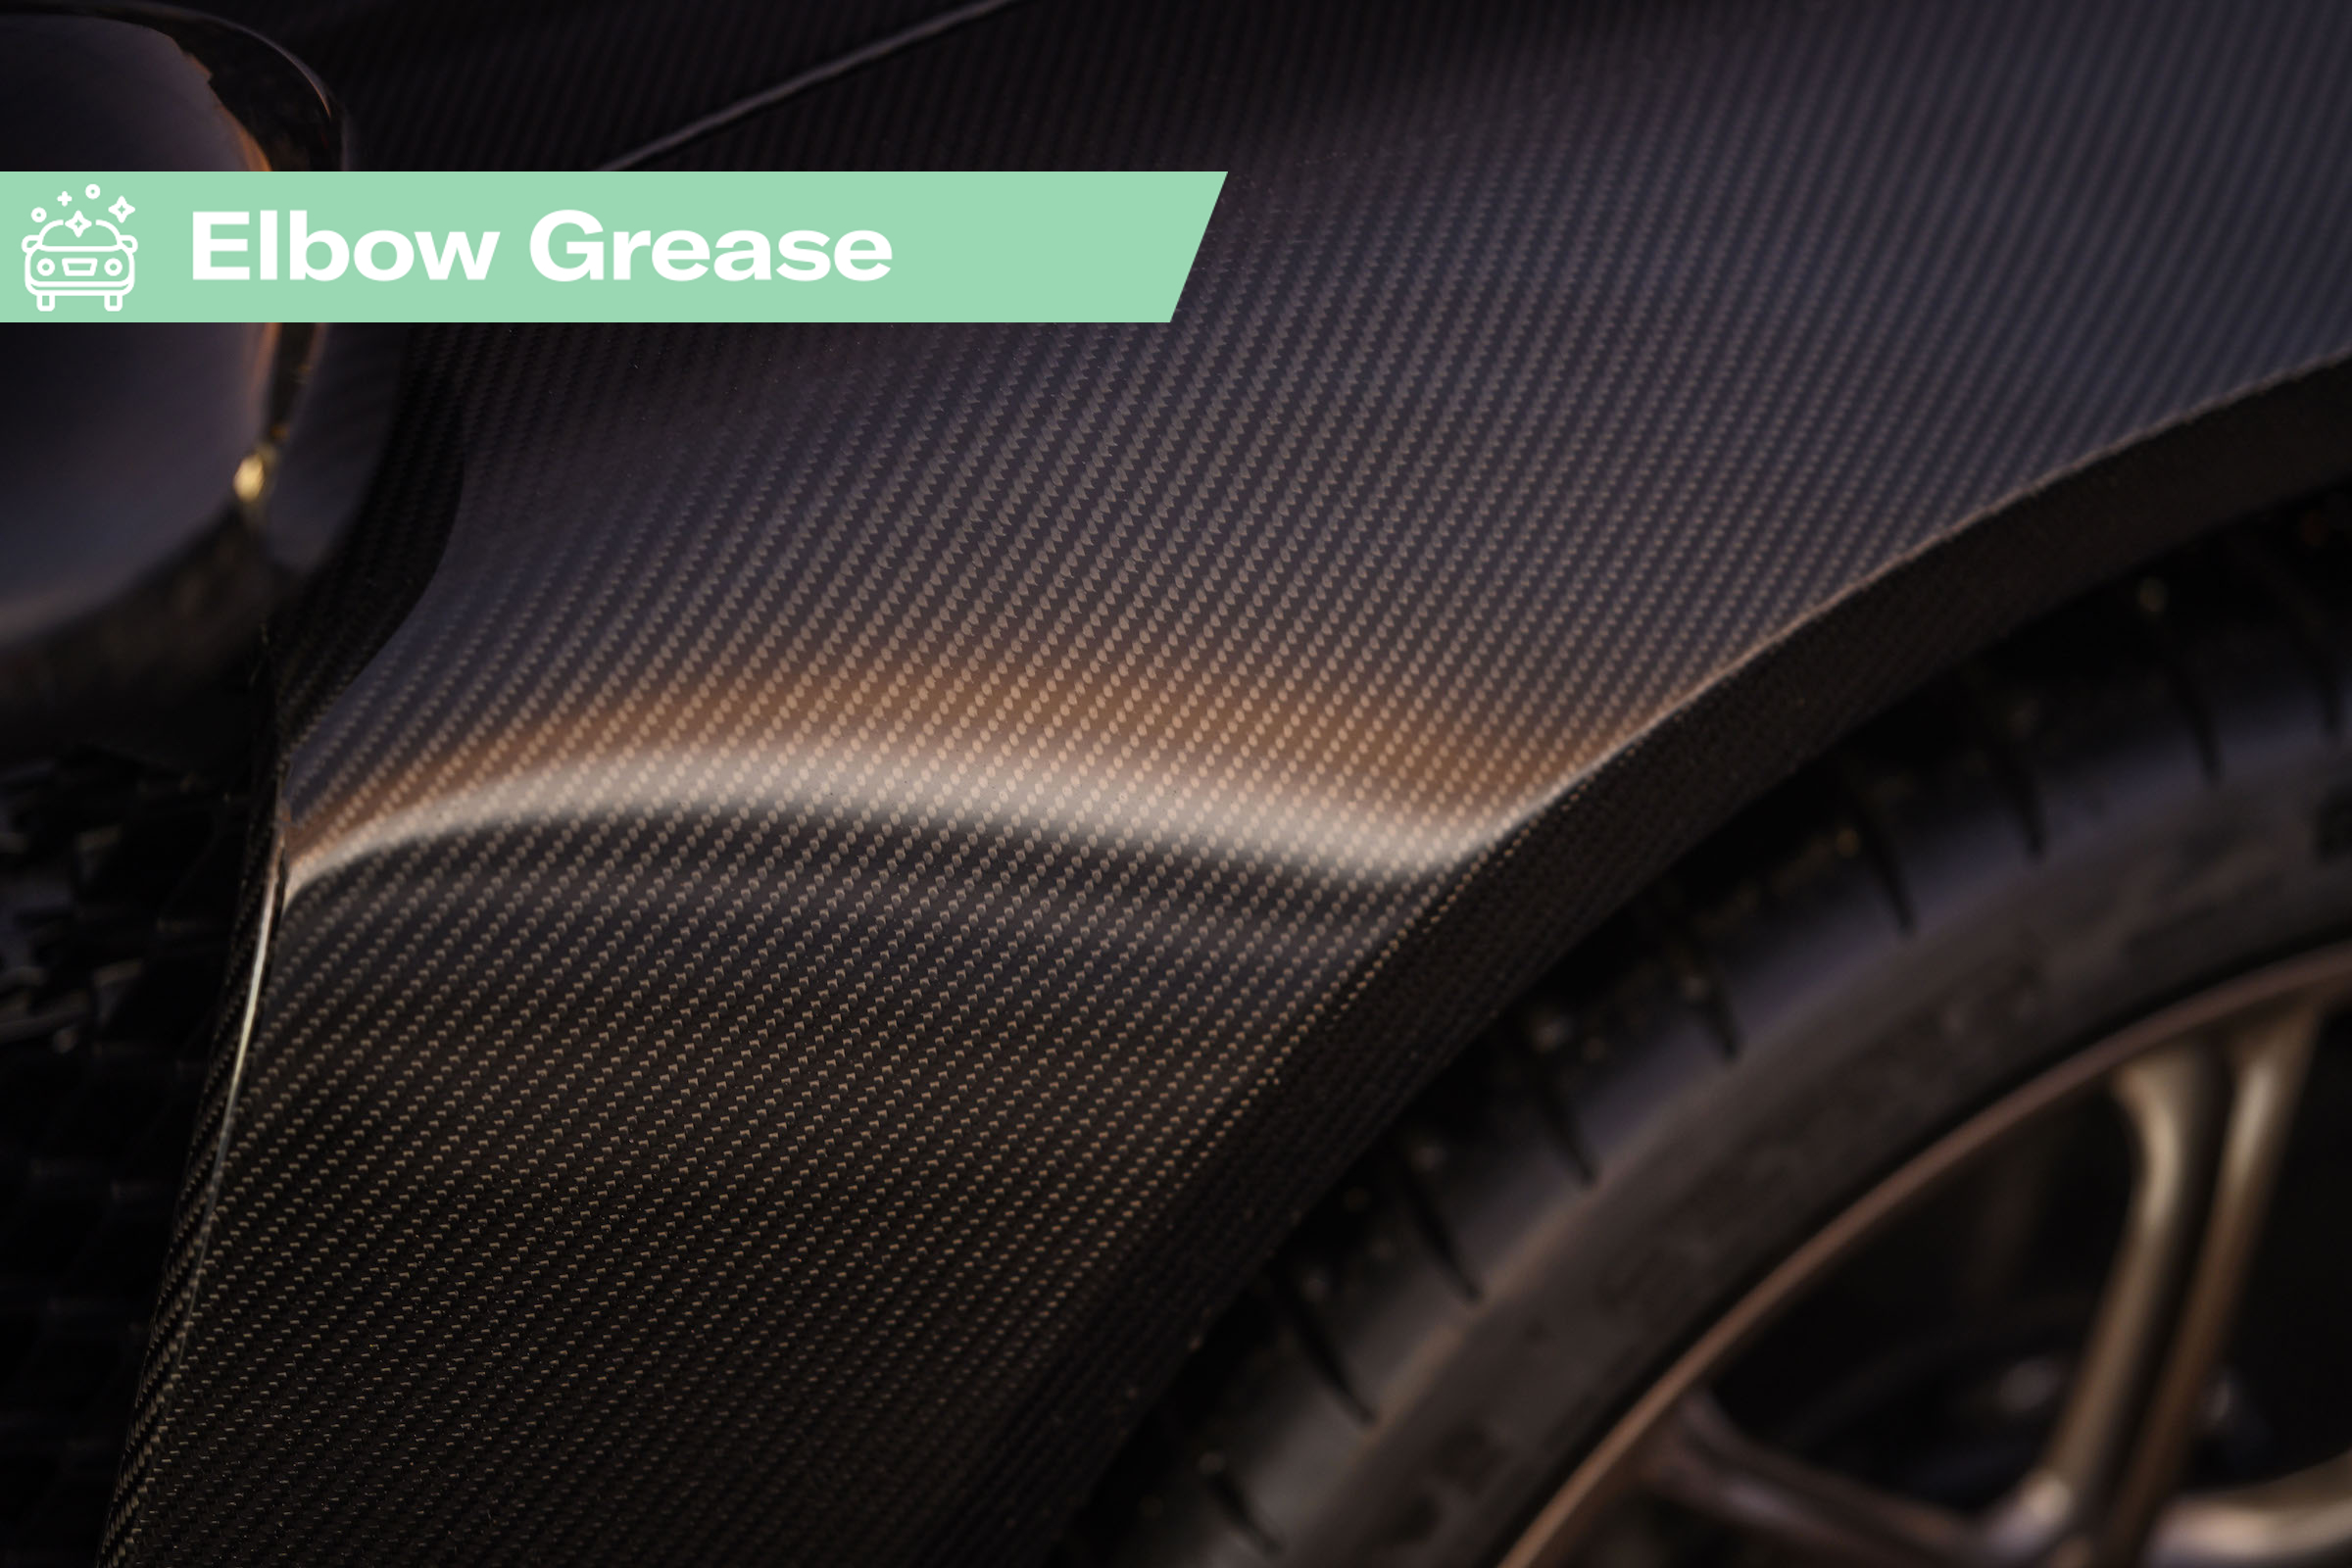 Elbow Grease: Care for your carbon fibre